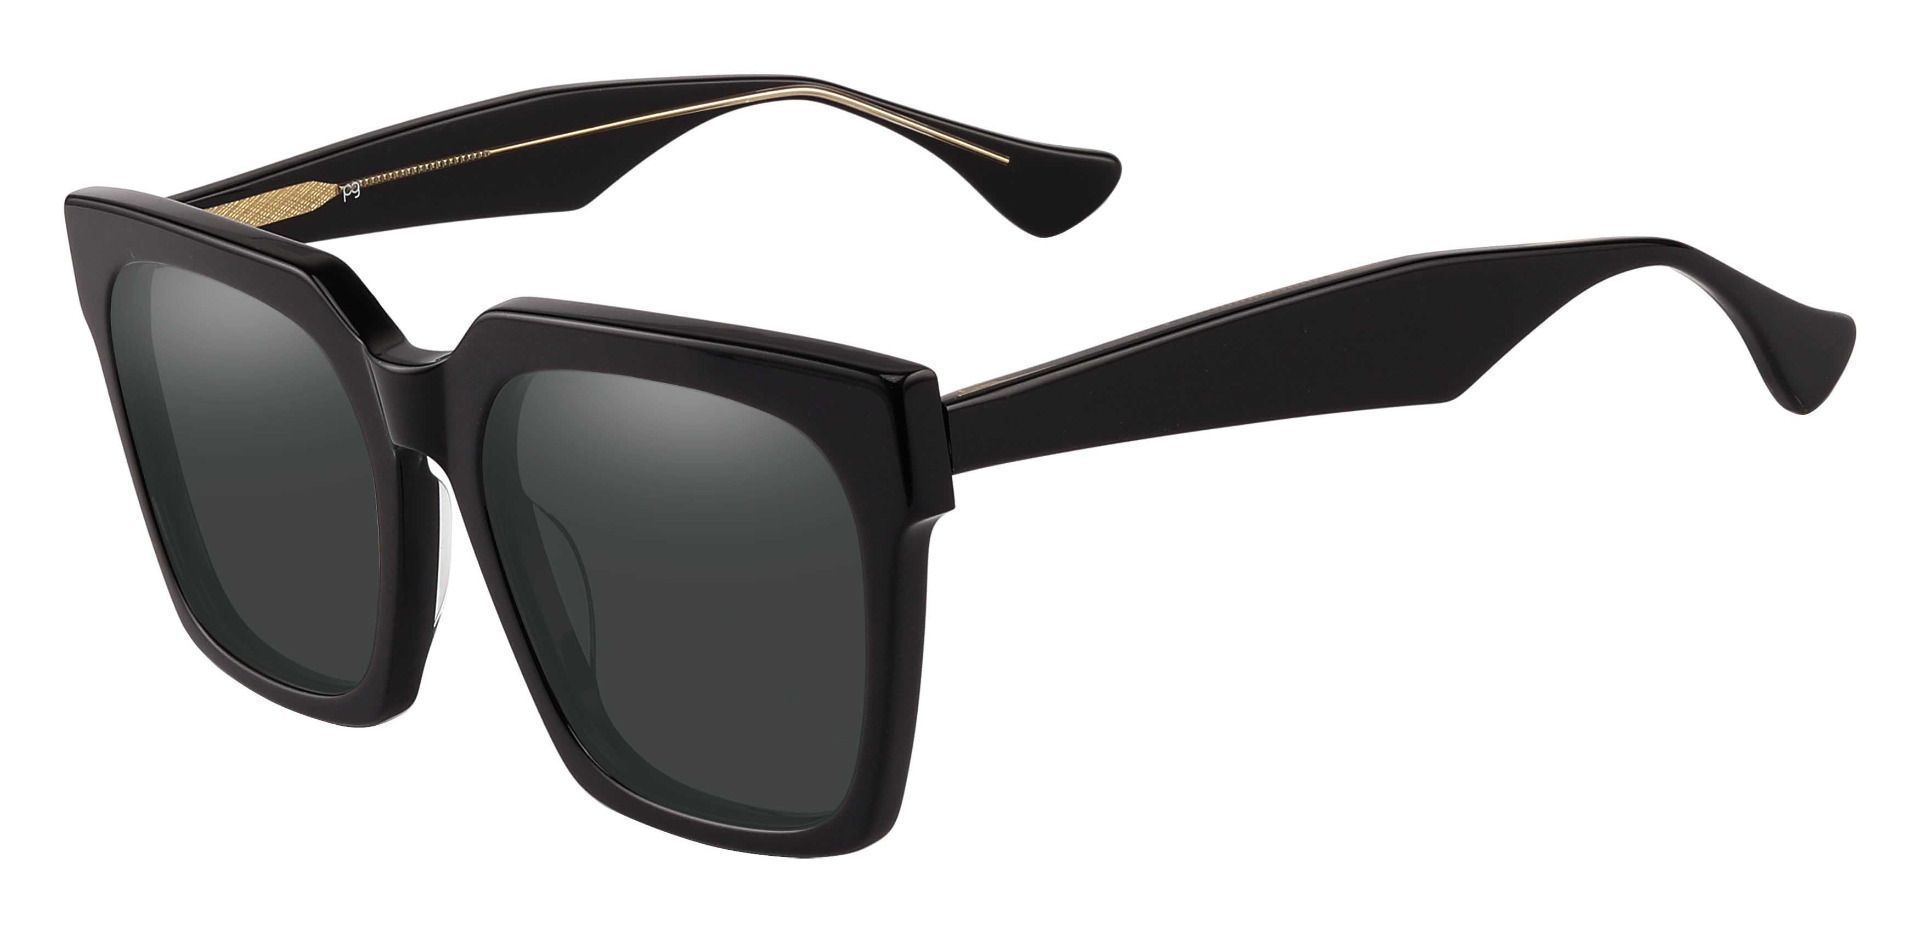 Harlan Square Lined Bifocal Sunglasses - Black Frame With Gray Lenses